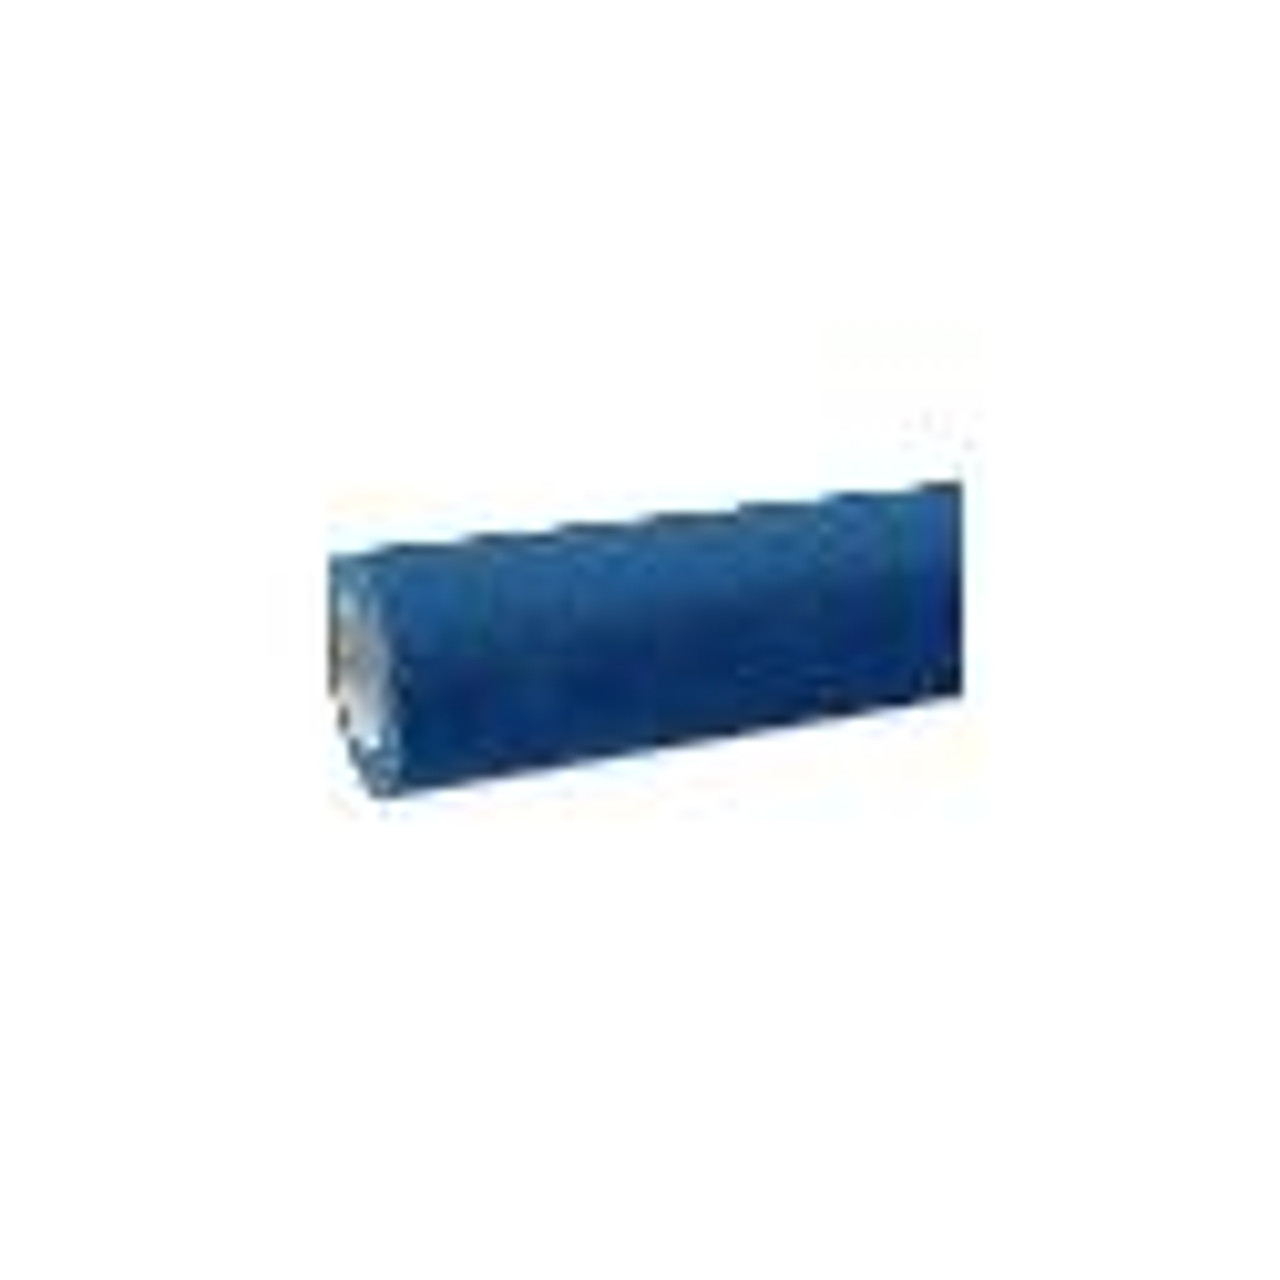 Rol-Dri Blue Replacement Roller - Case of 12 includes shipping